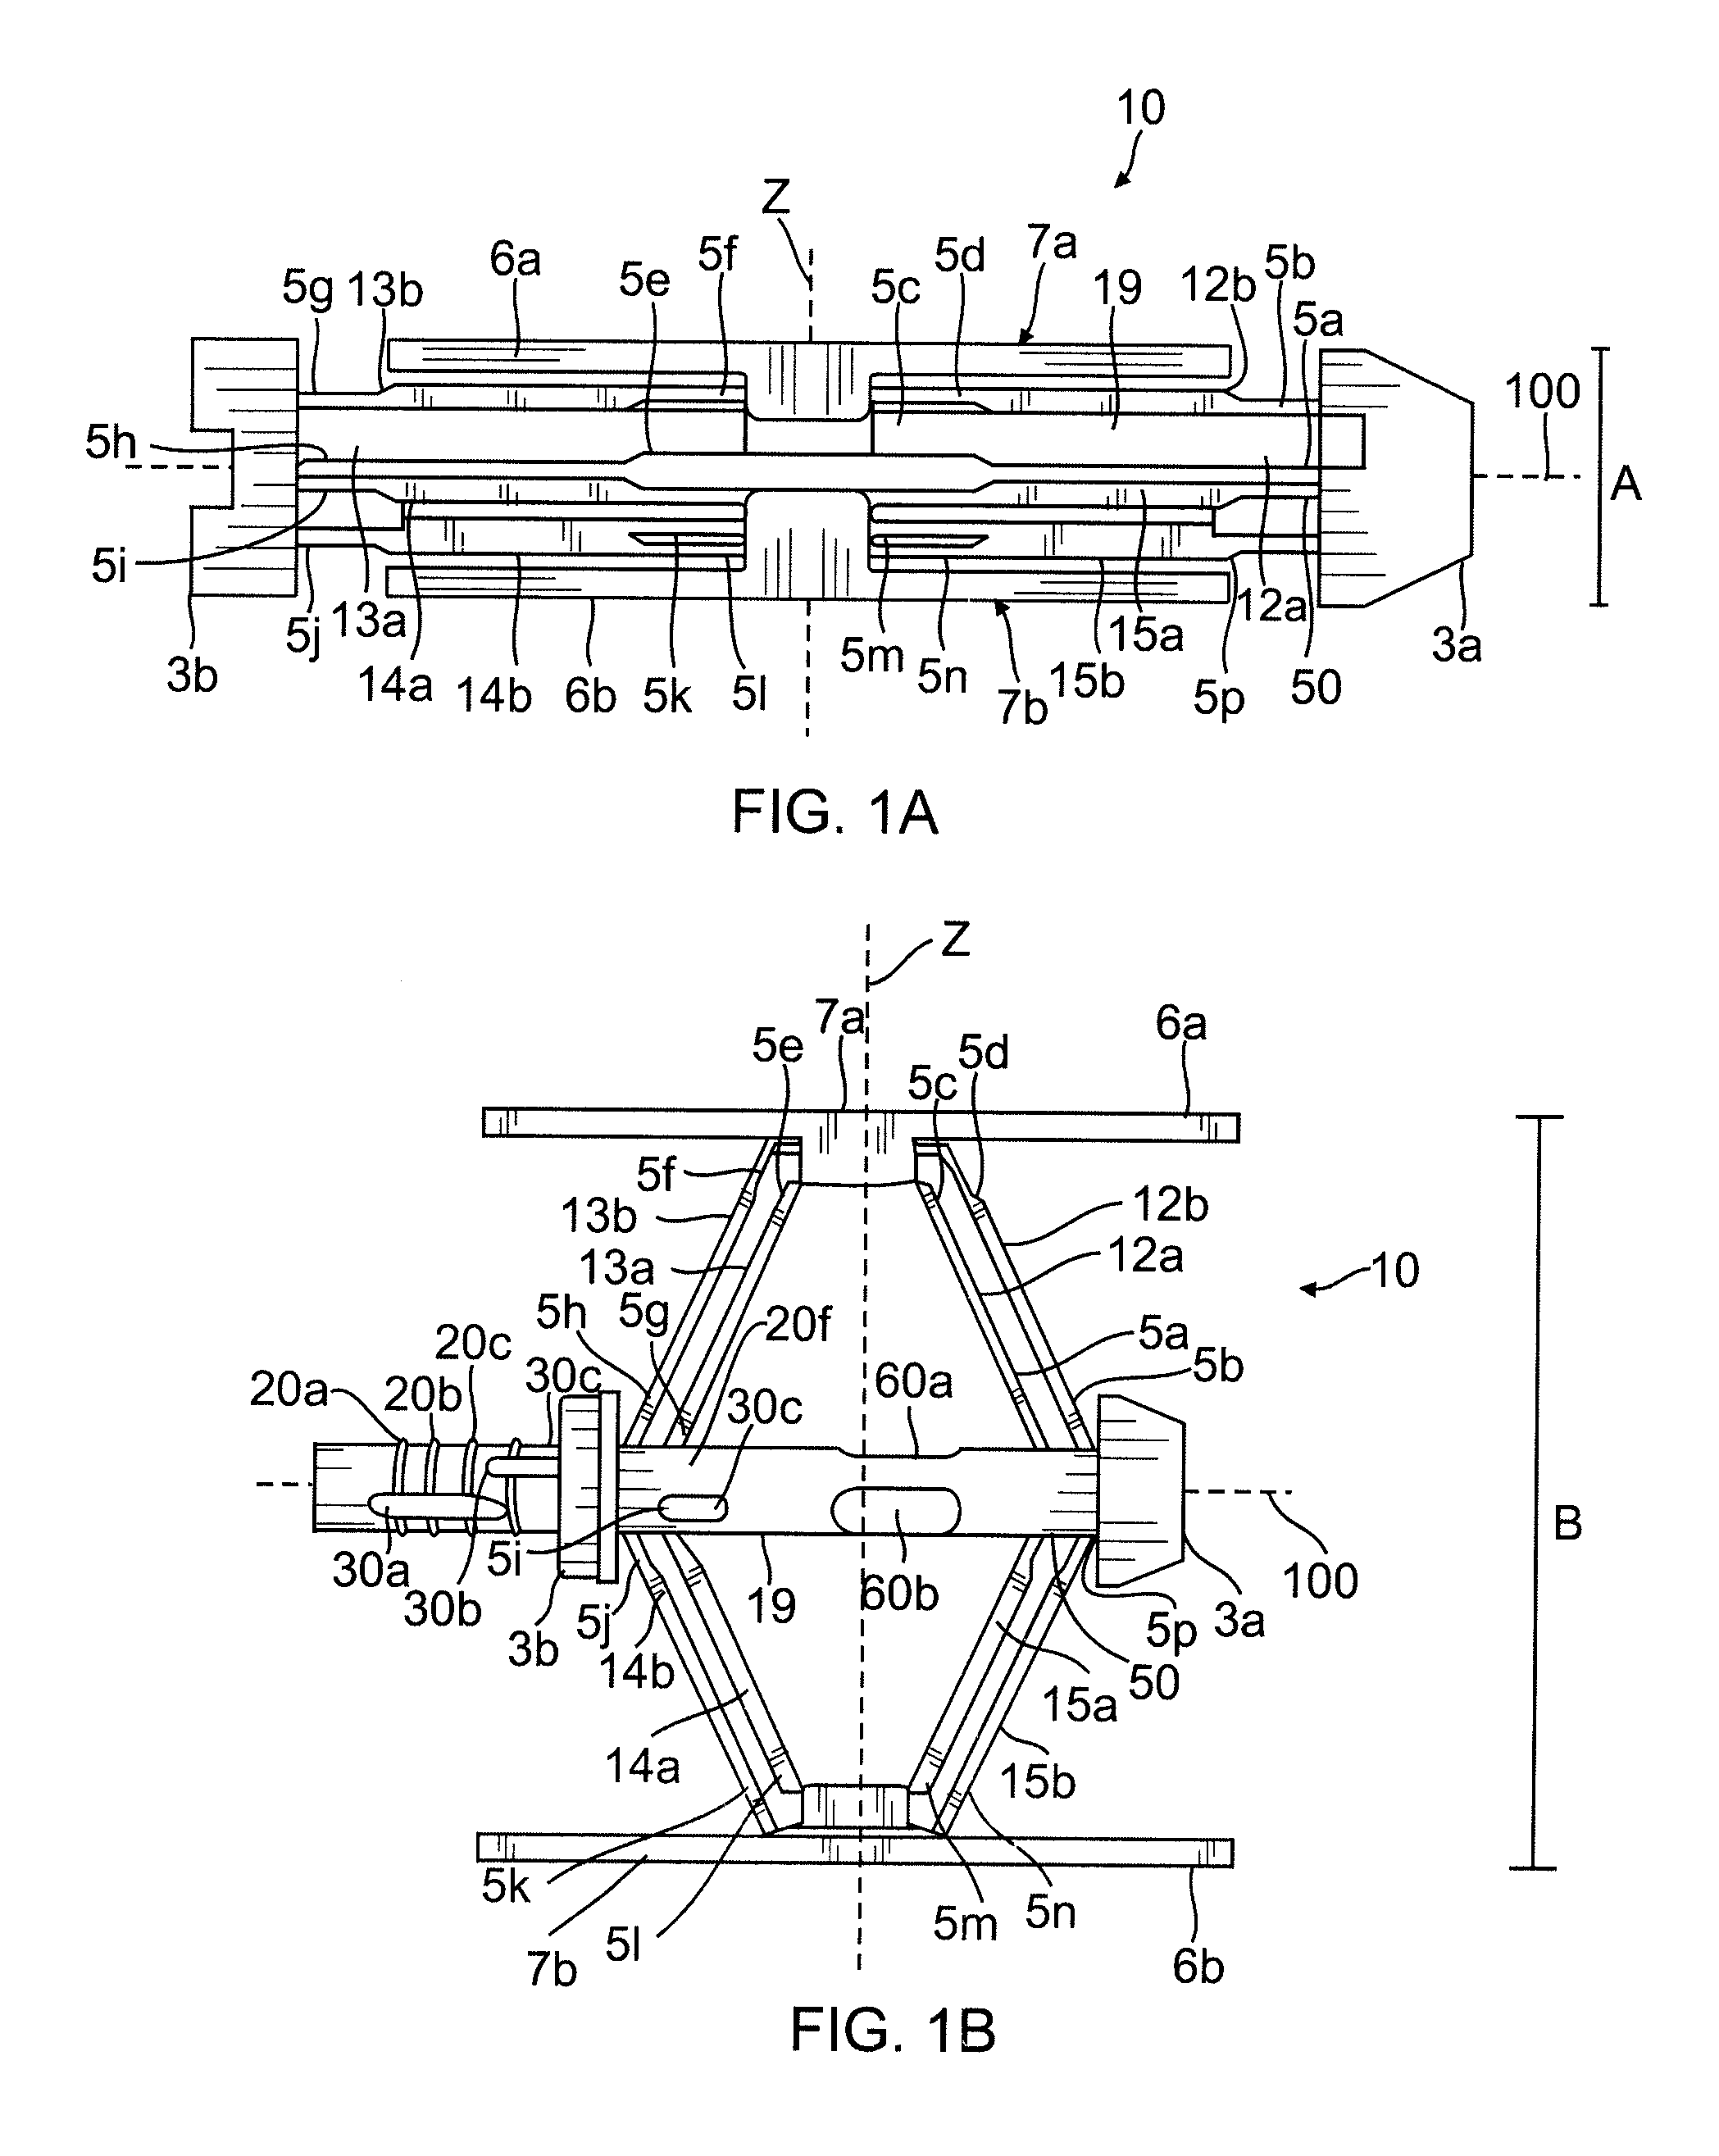 Apparatus for bone restoration of the spine and methods of use